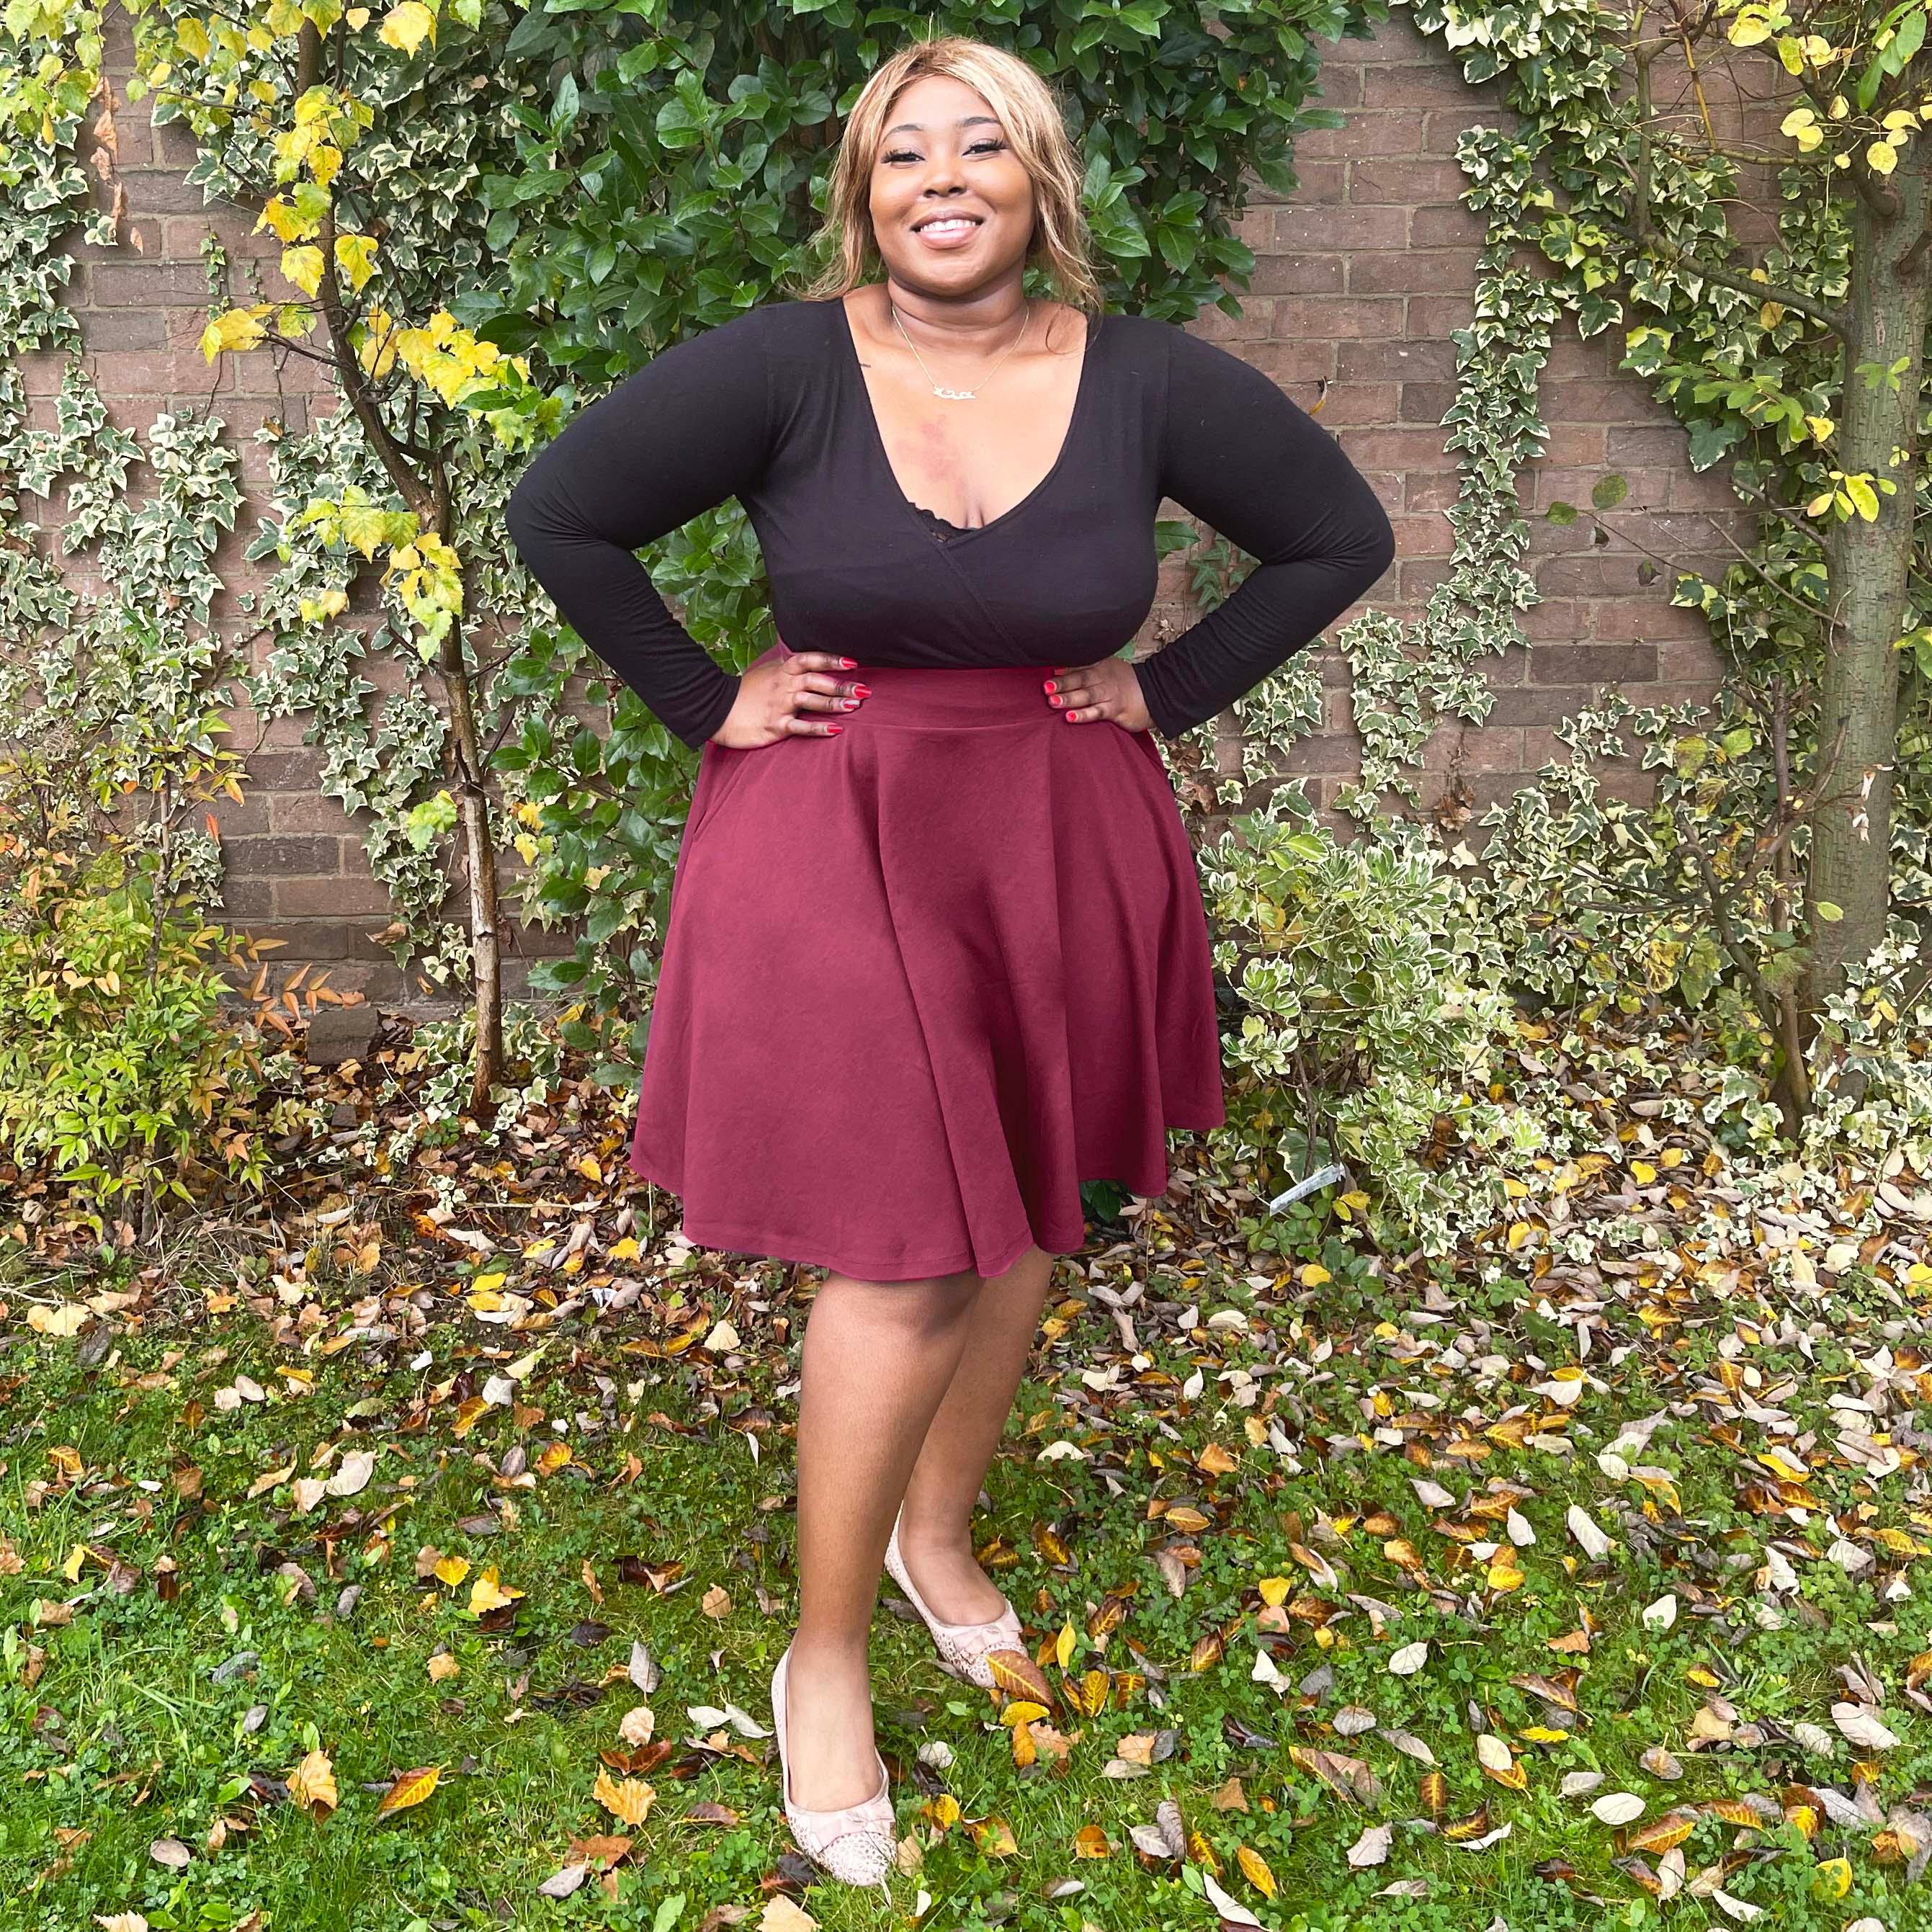 Plus Size Pleated Skirt in Burgundy, Fashionable Plus Size